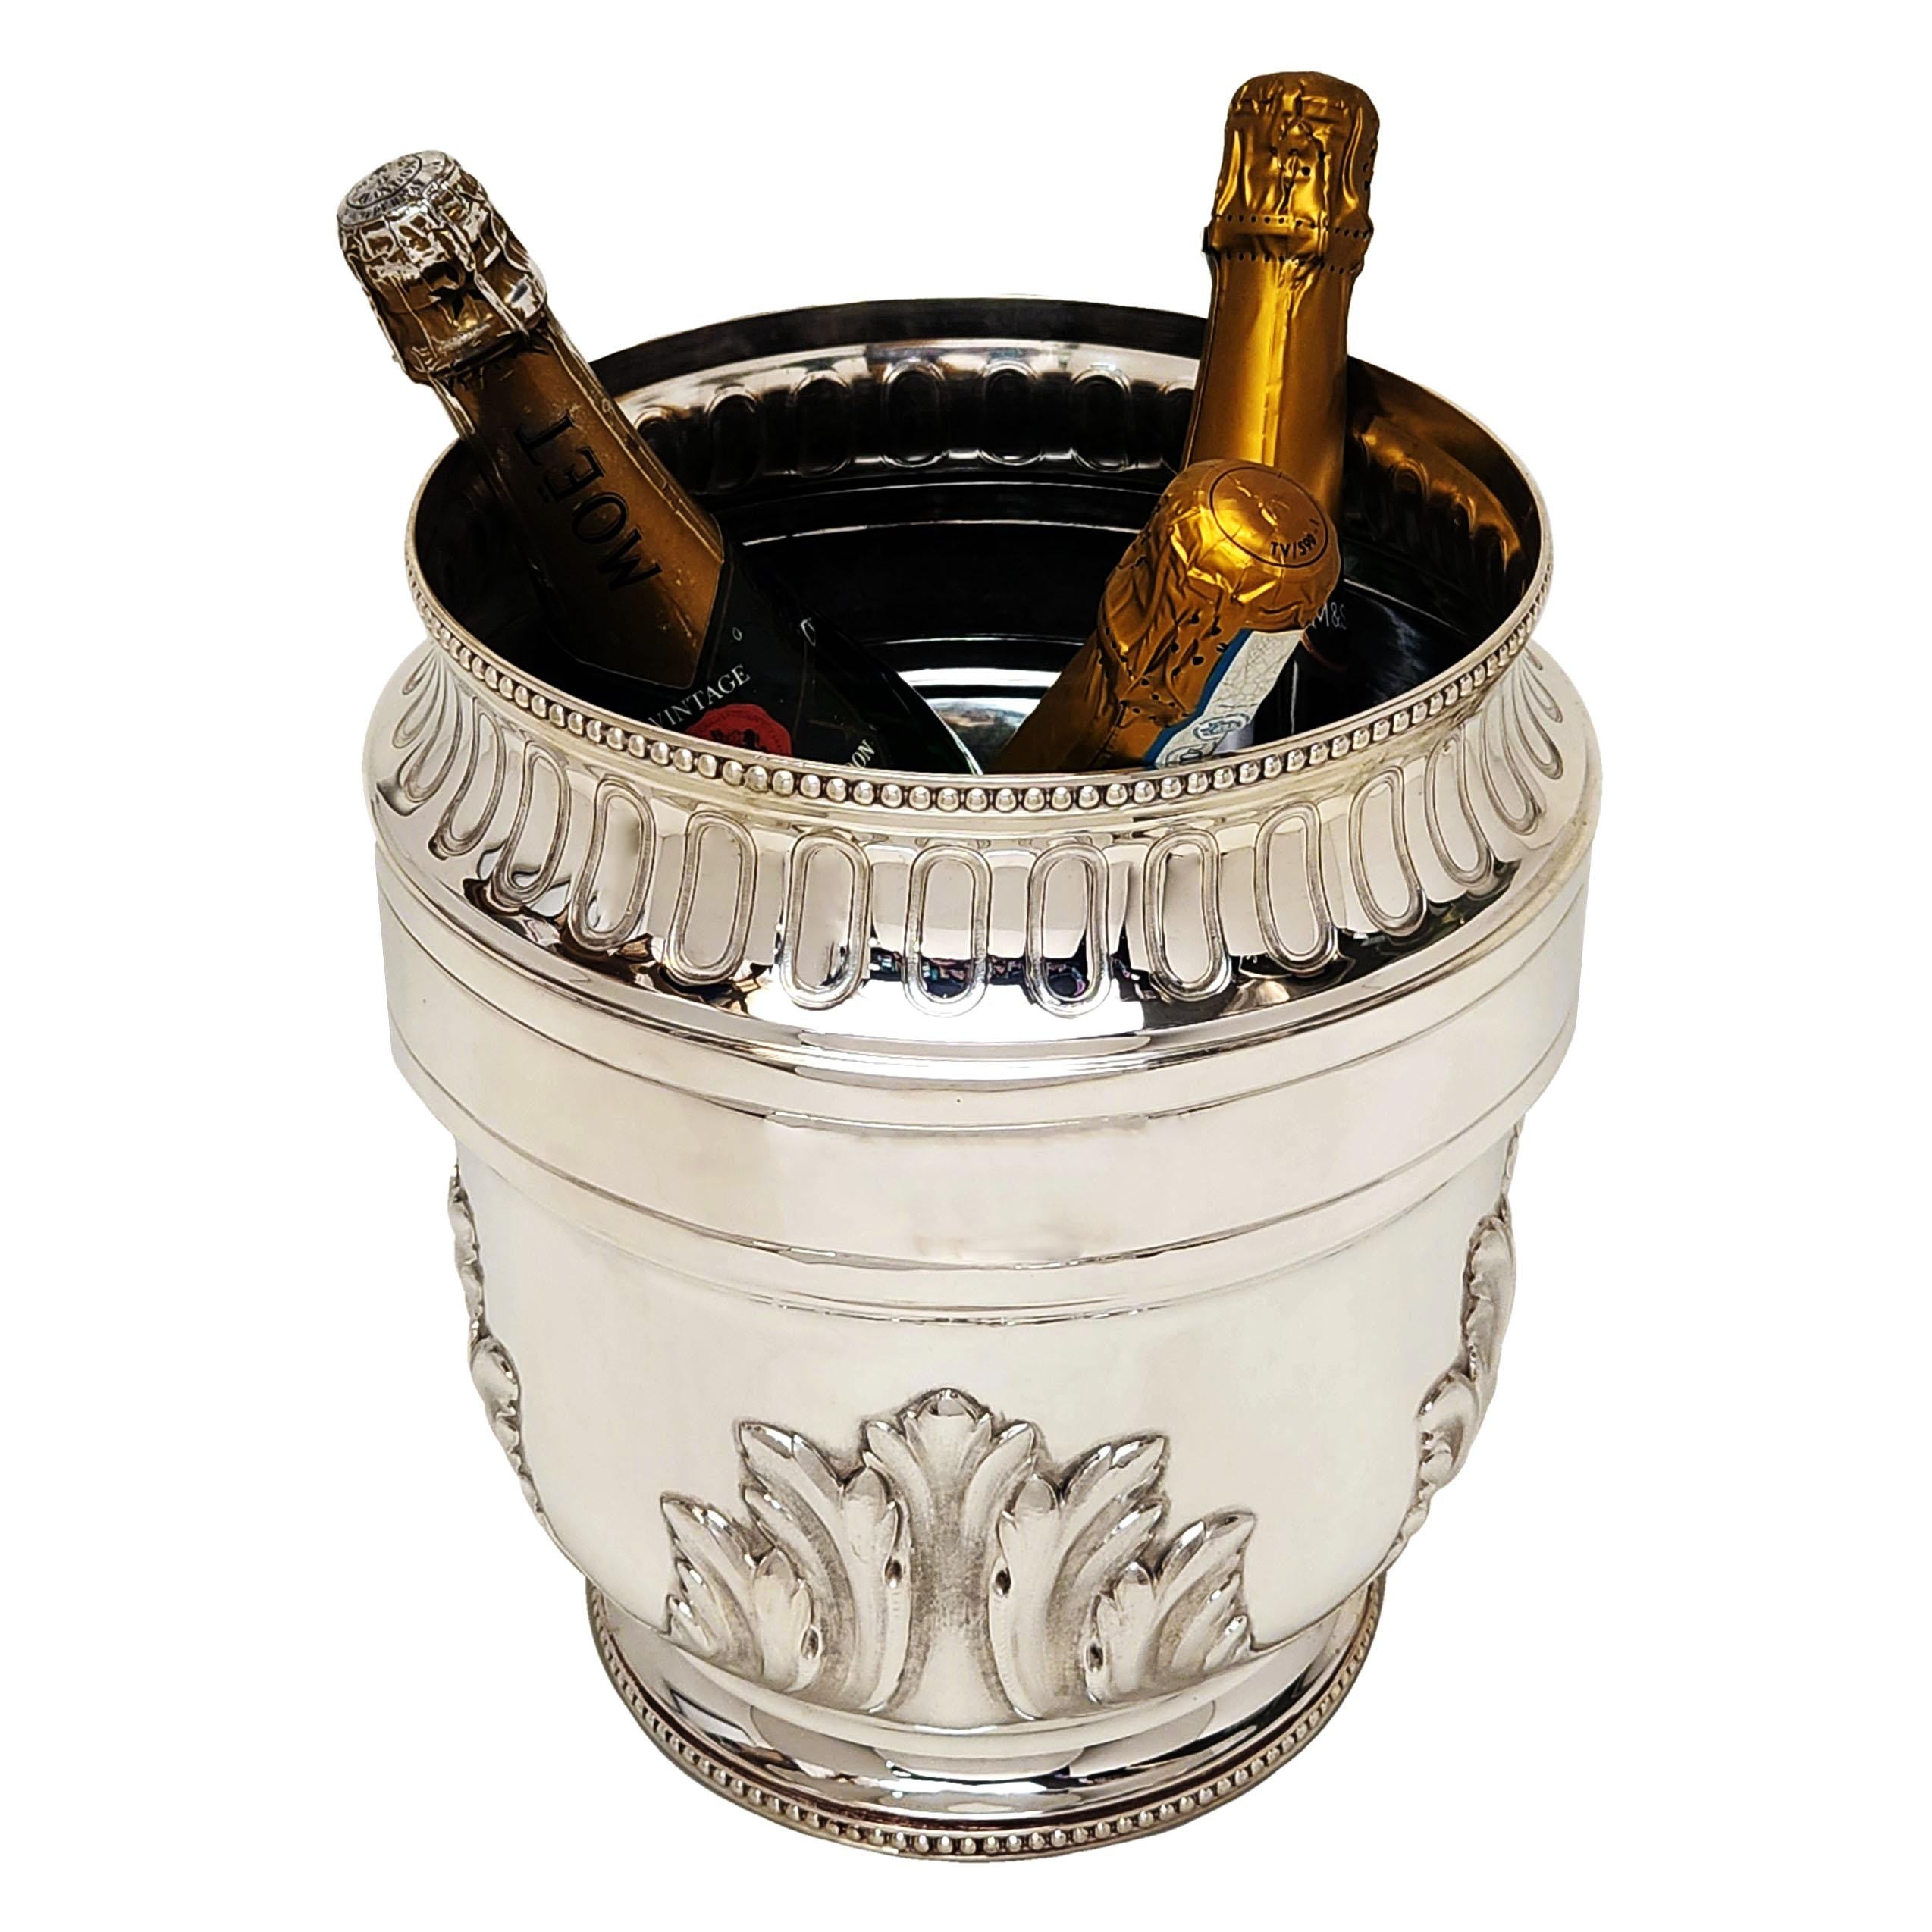 A Large Antique French Silver Wine Cooler decorated with a chased stylised leaf design and with a a pair of leaf bordered cartouches. The upper and lower rim of the Cooler is embellished with a classic bead border.

Made in France in c.